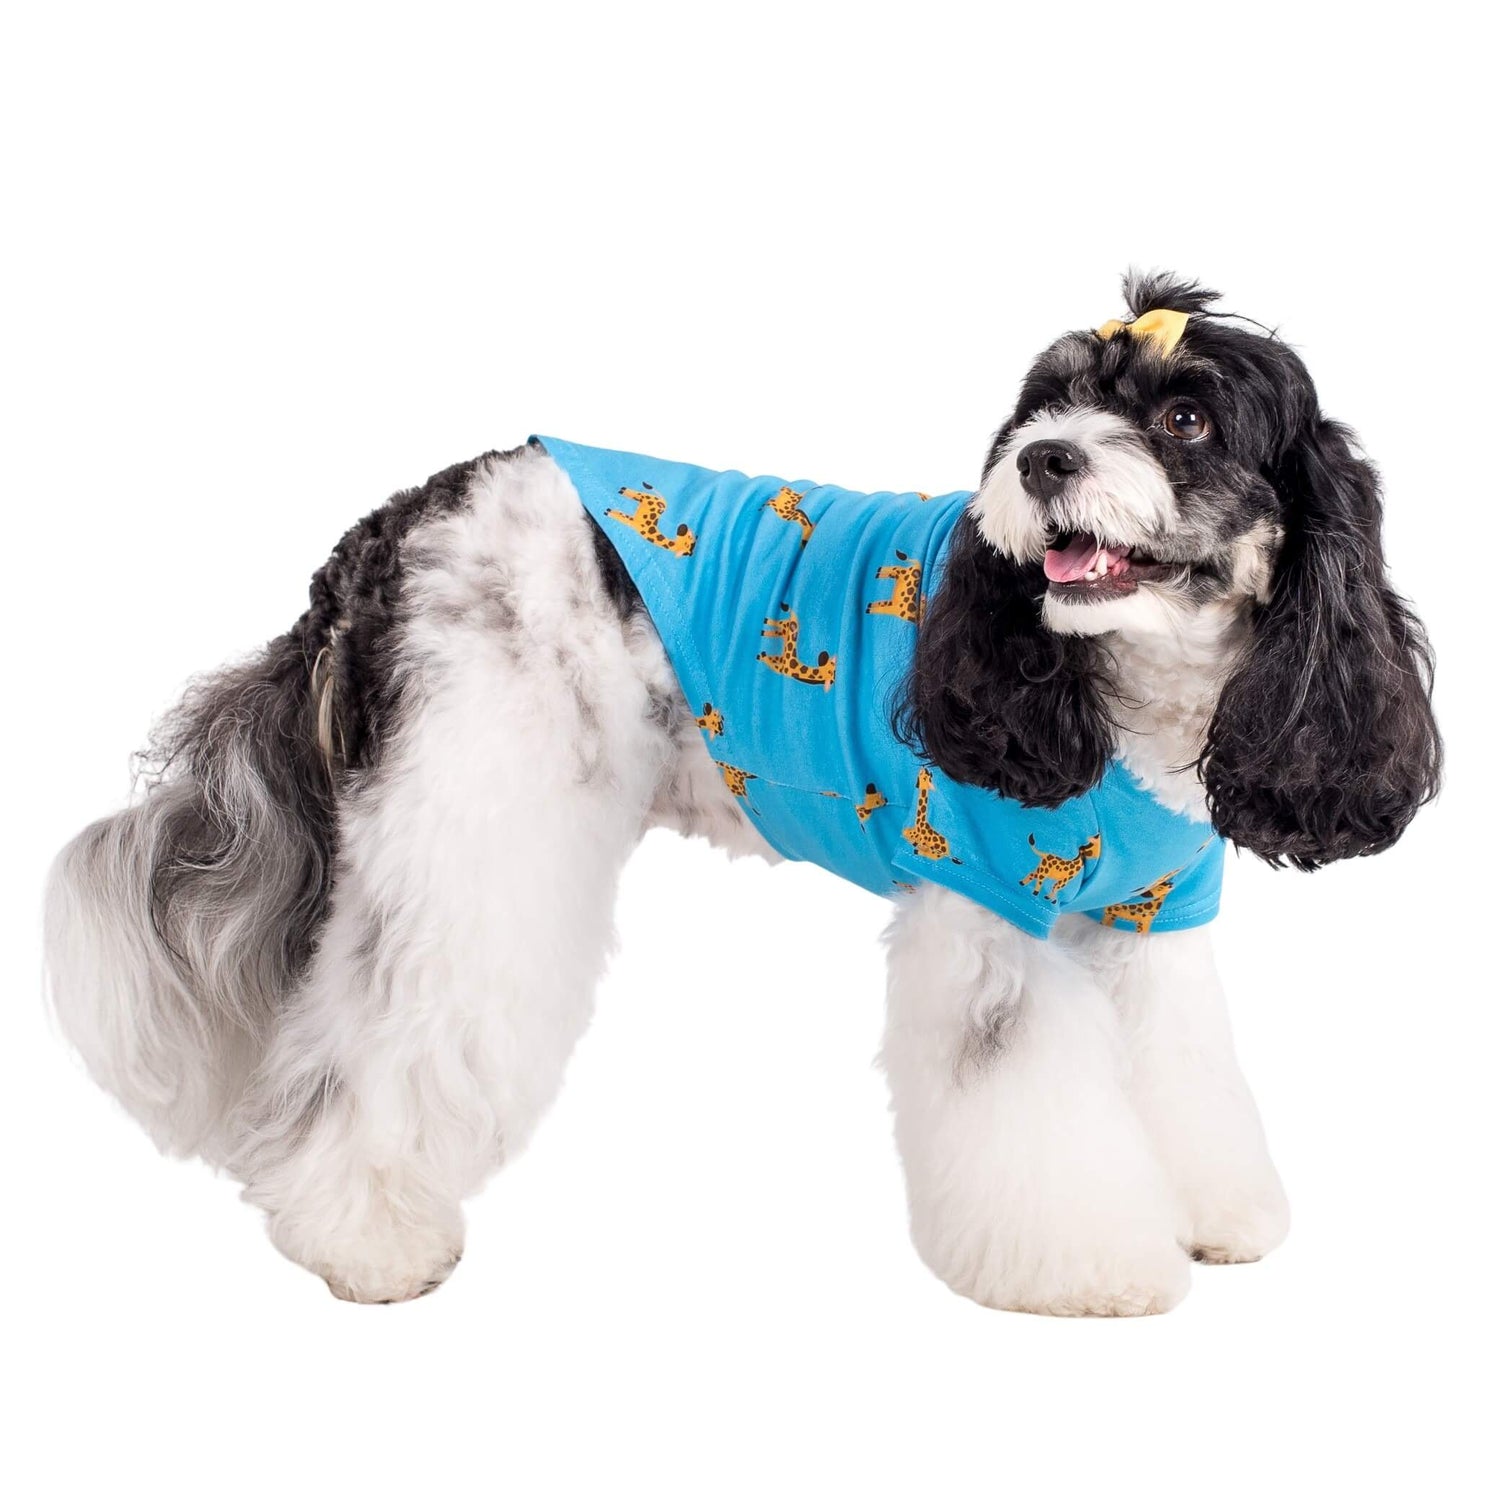 Rosie the cavoodle wearing Gerald the Giraffe dog pyjamas made by Vibrant Hound. The dog pyjamas are blue, with girrafes printed on them.